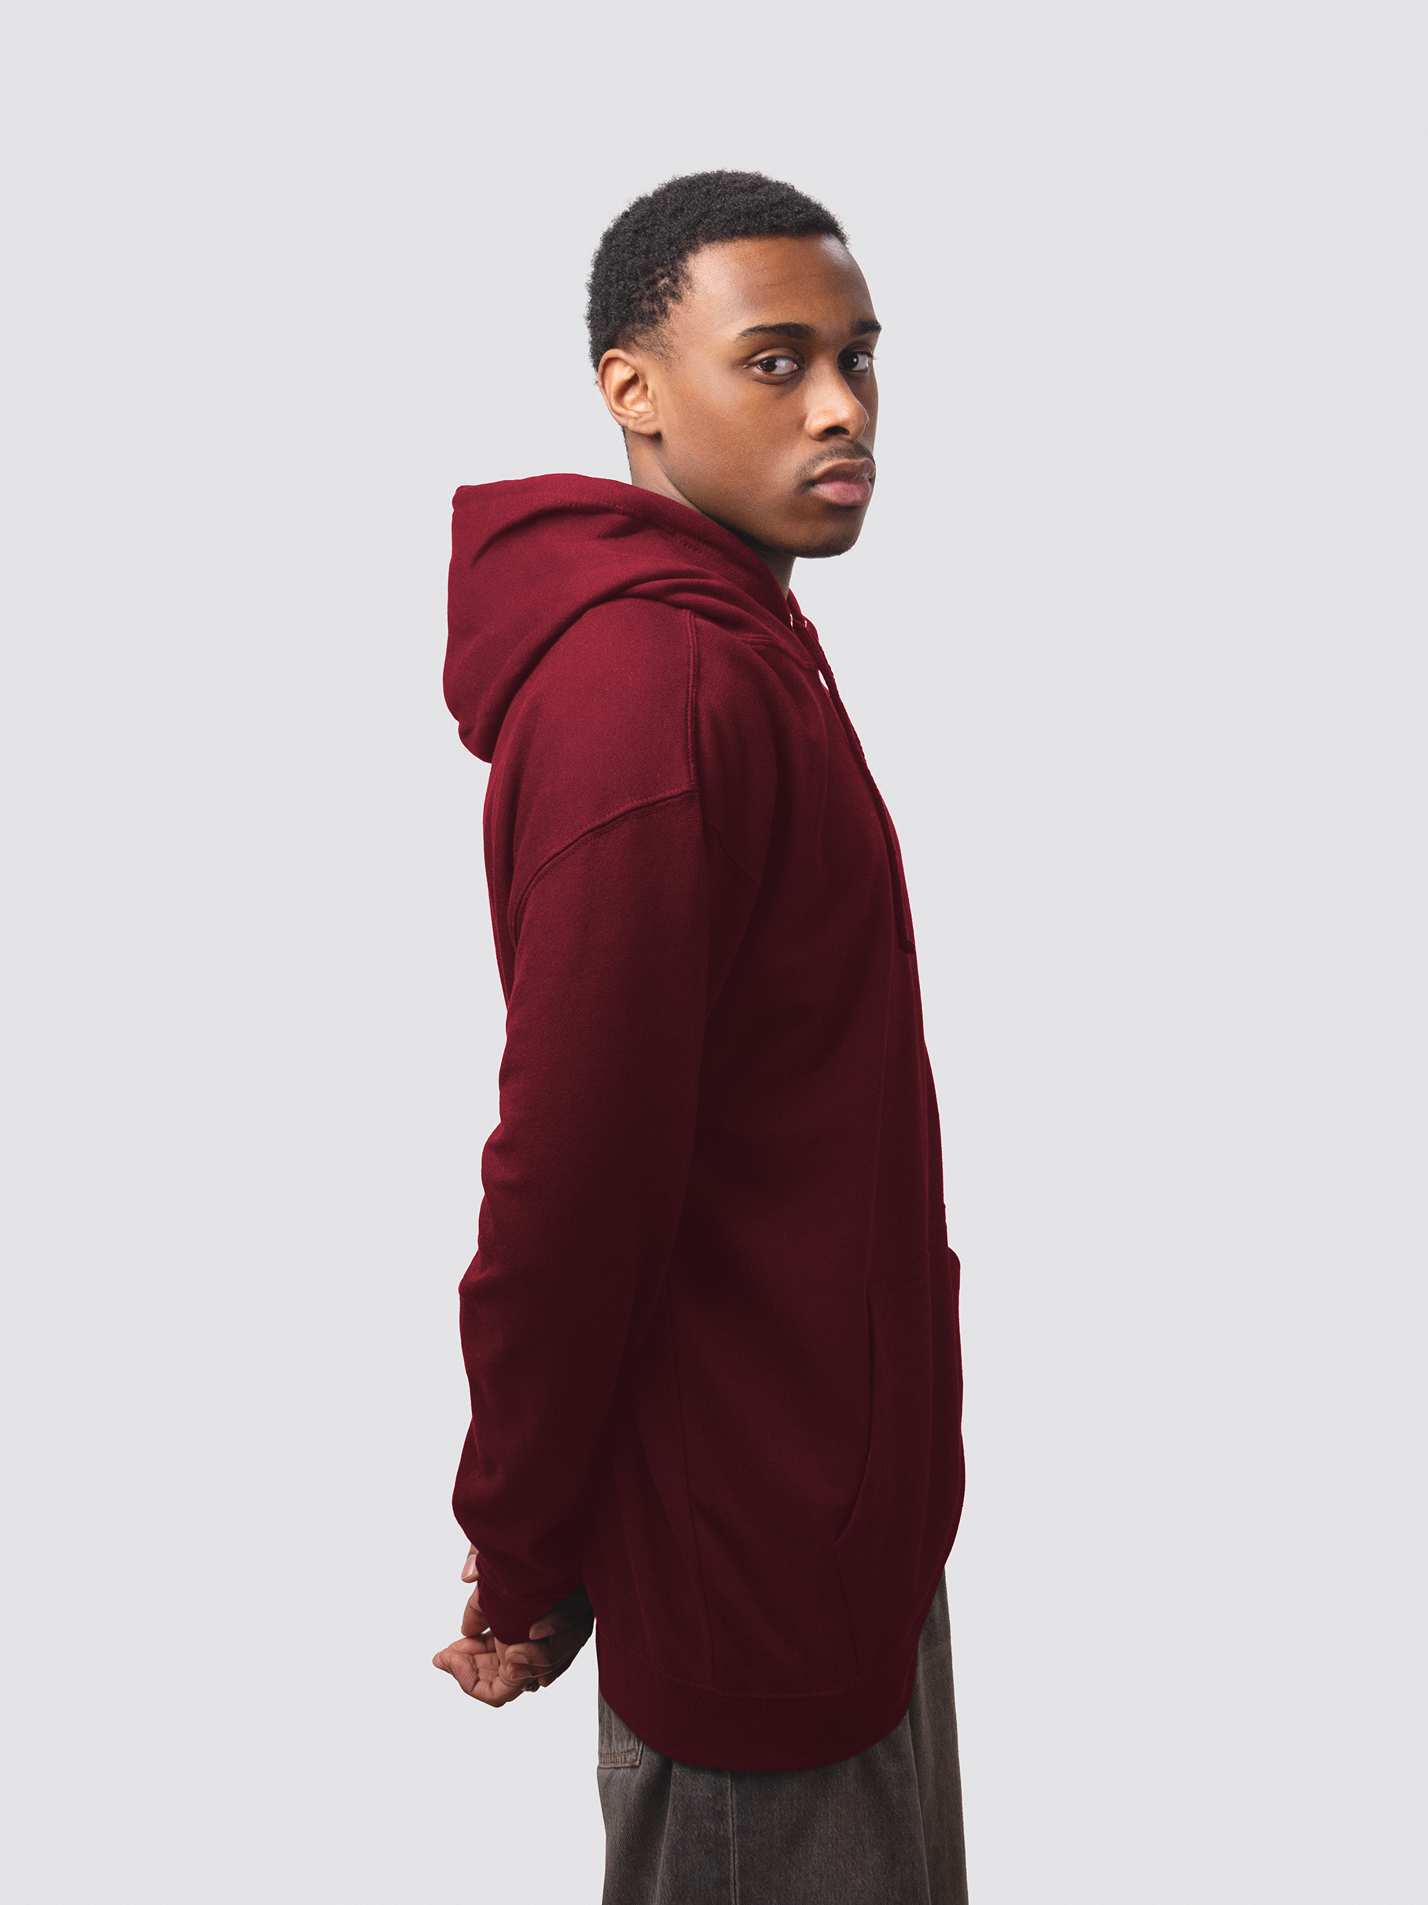 Robinson College hoodie, made from burgundy cotton-faced fabric